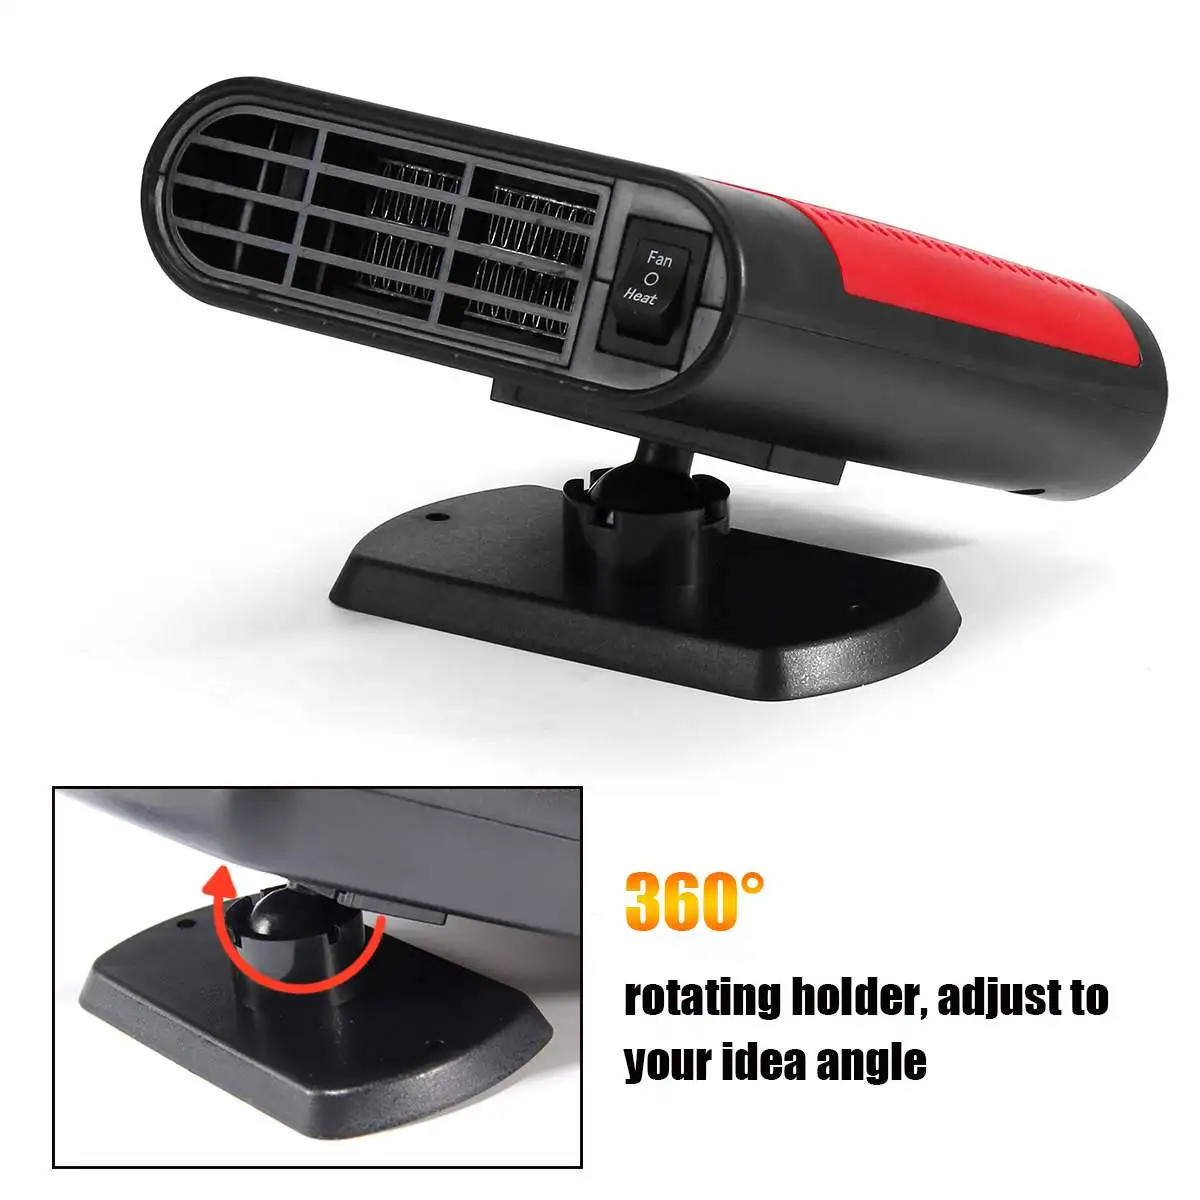 ALBABKC 12V 150W Portable 2-in-1 Car Electric Heating & Cooling Fan